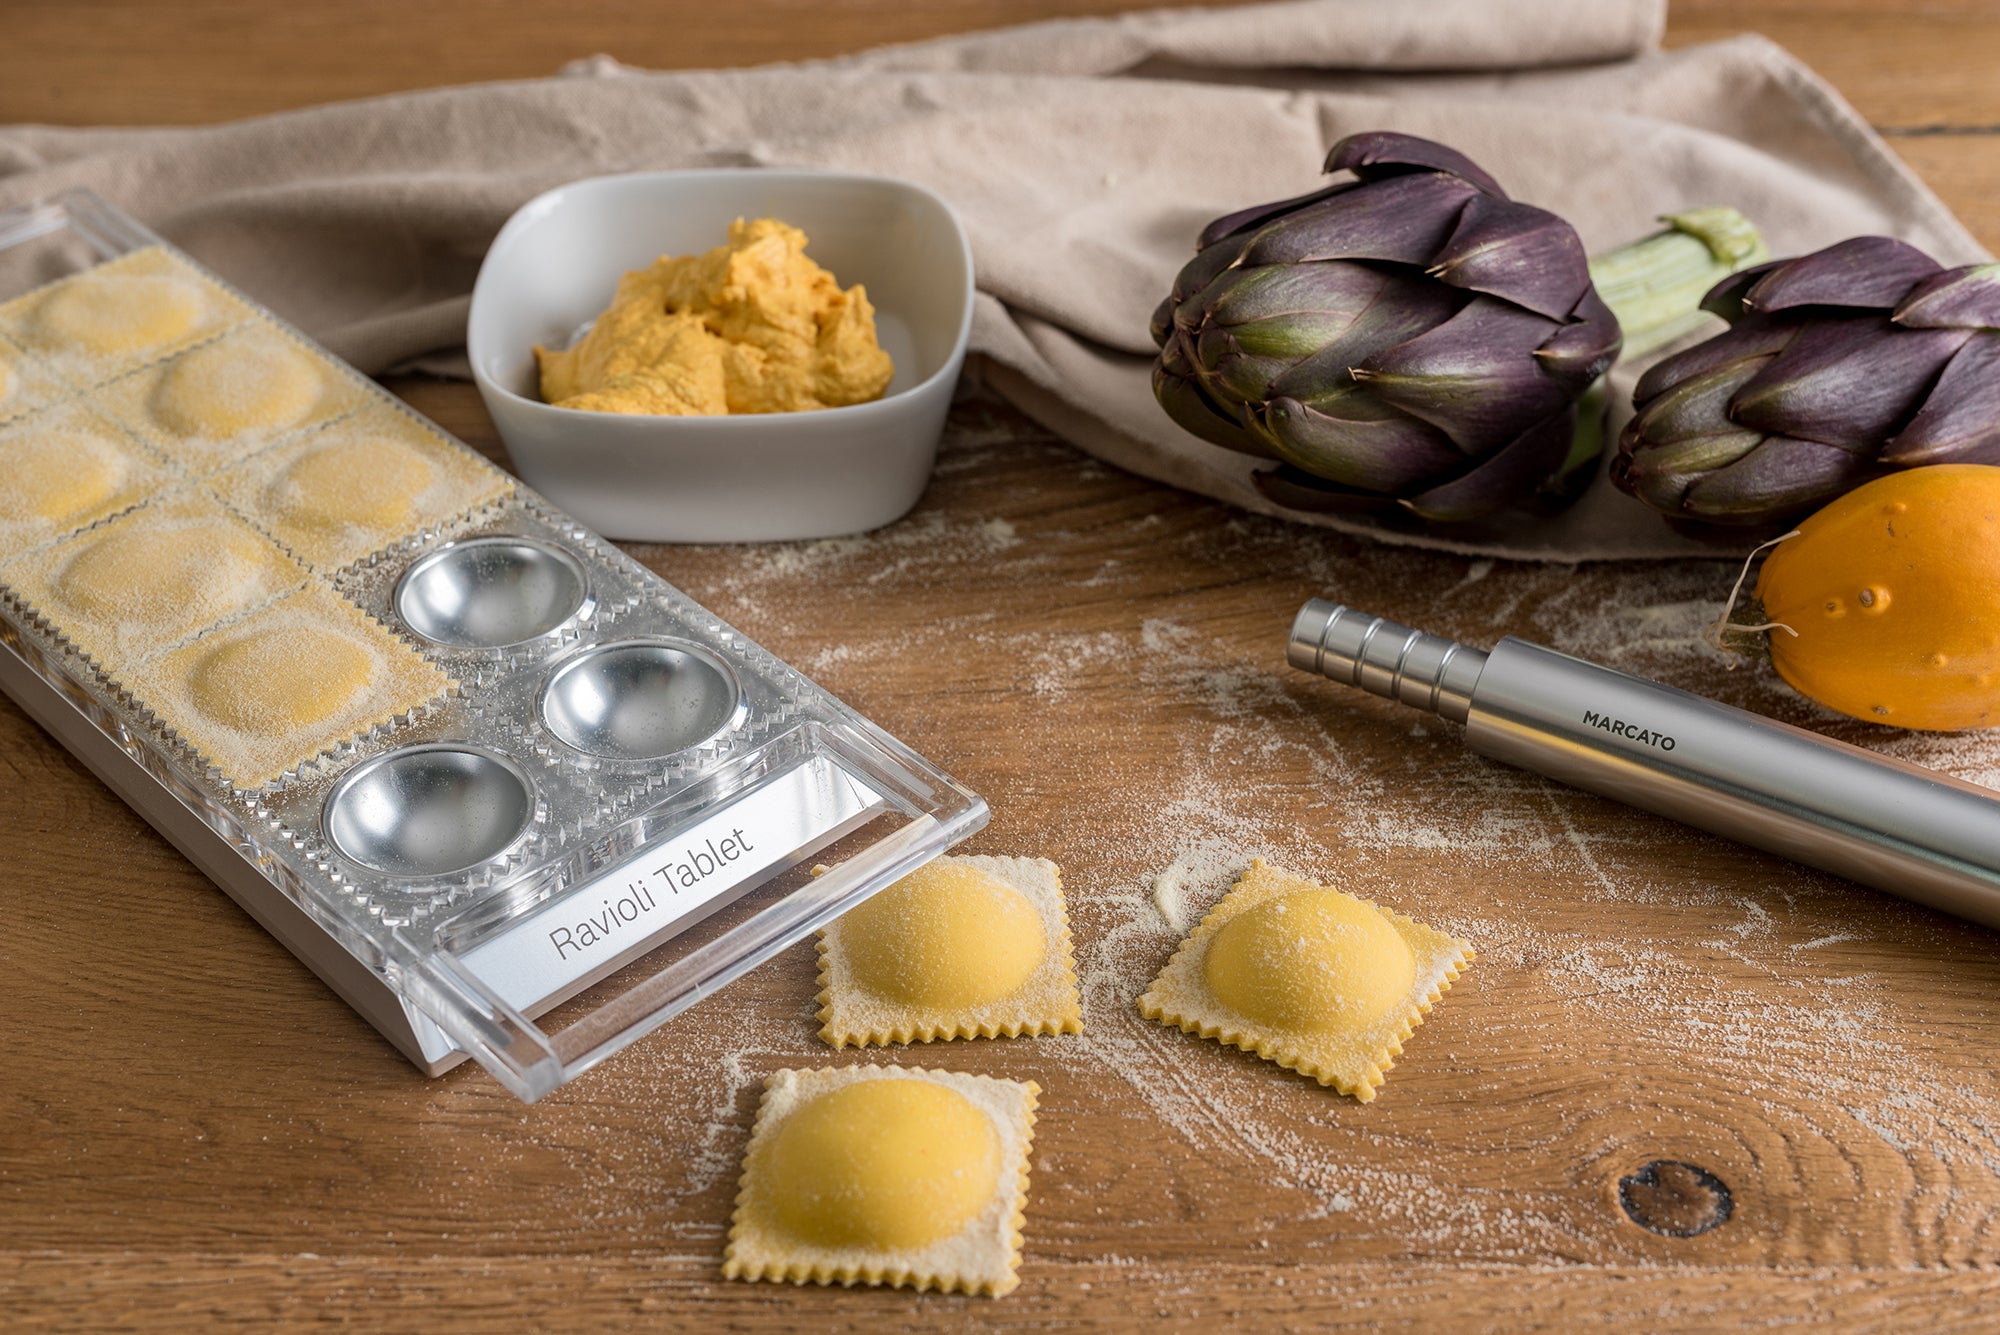 Marcato Stampo Ravioli with rolling pin